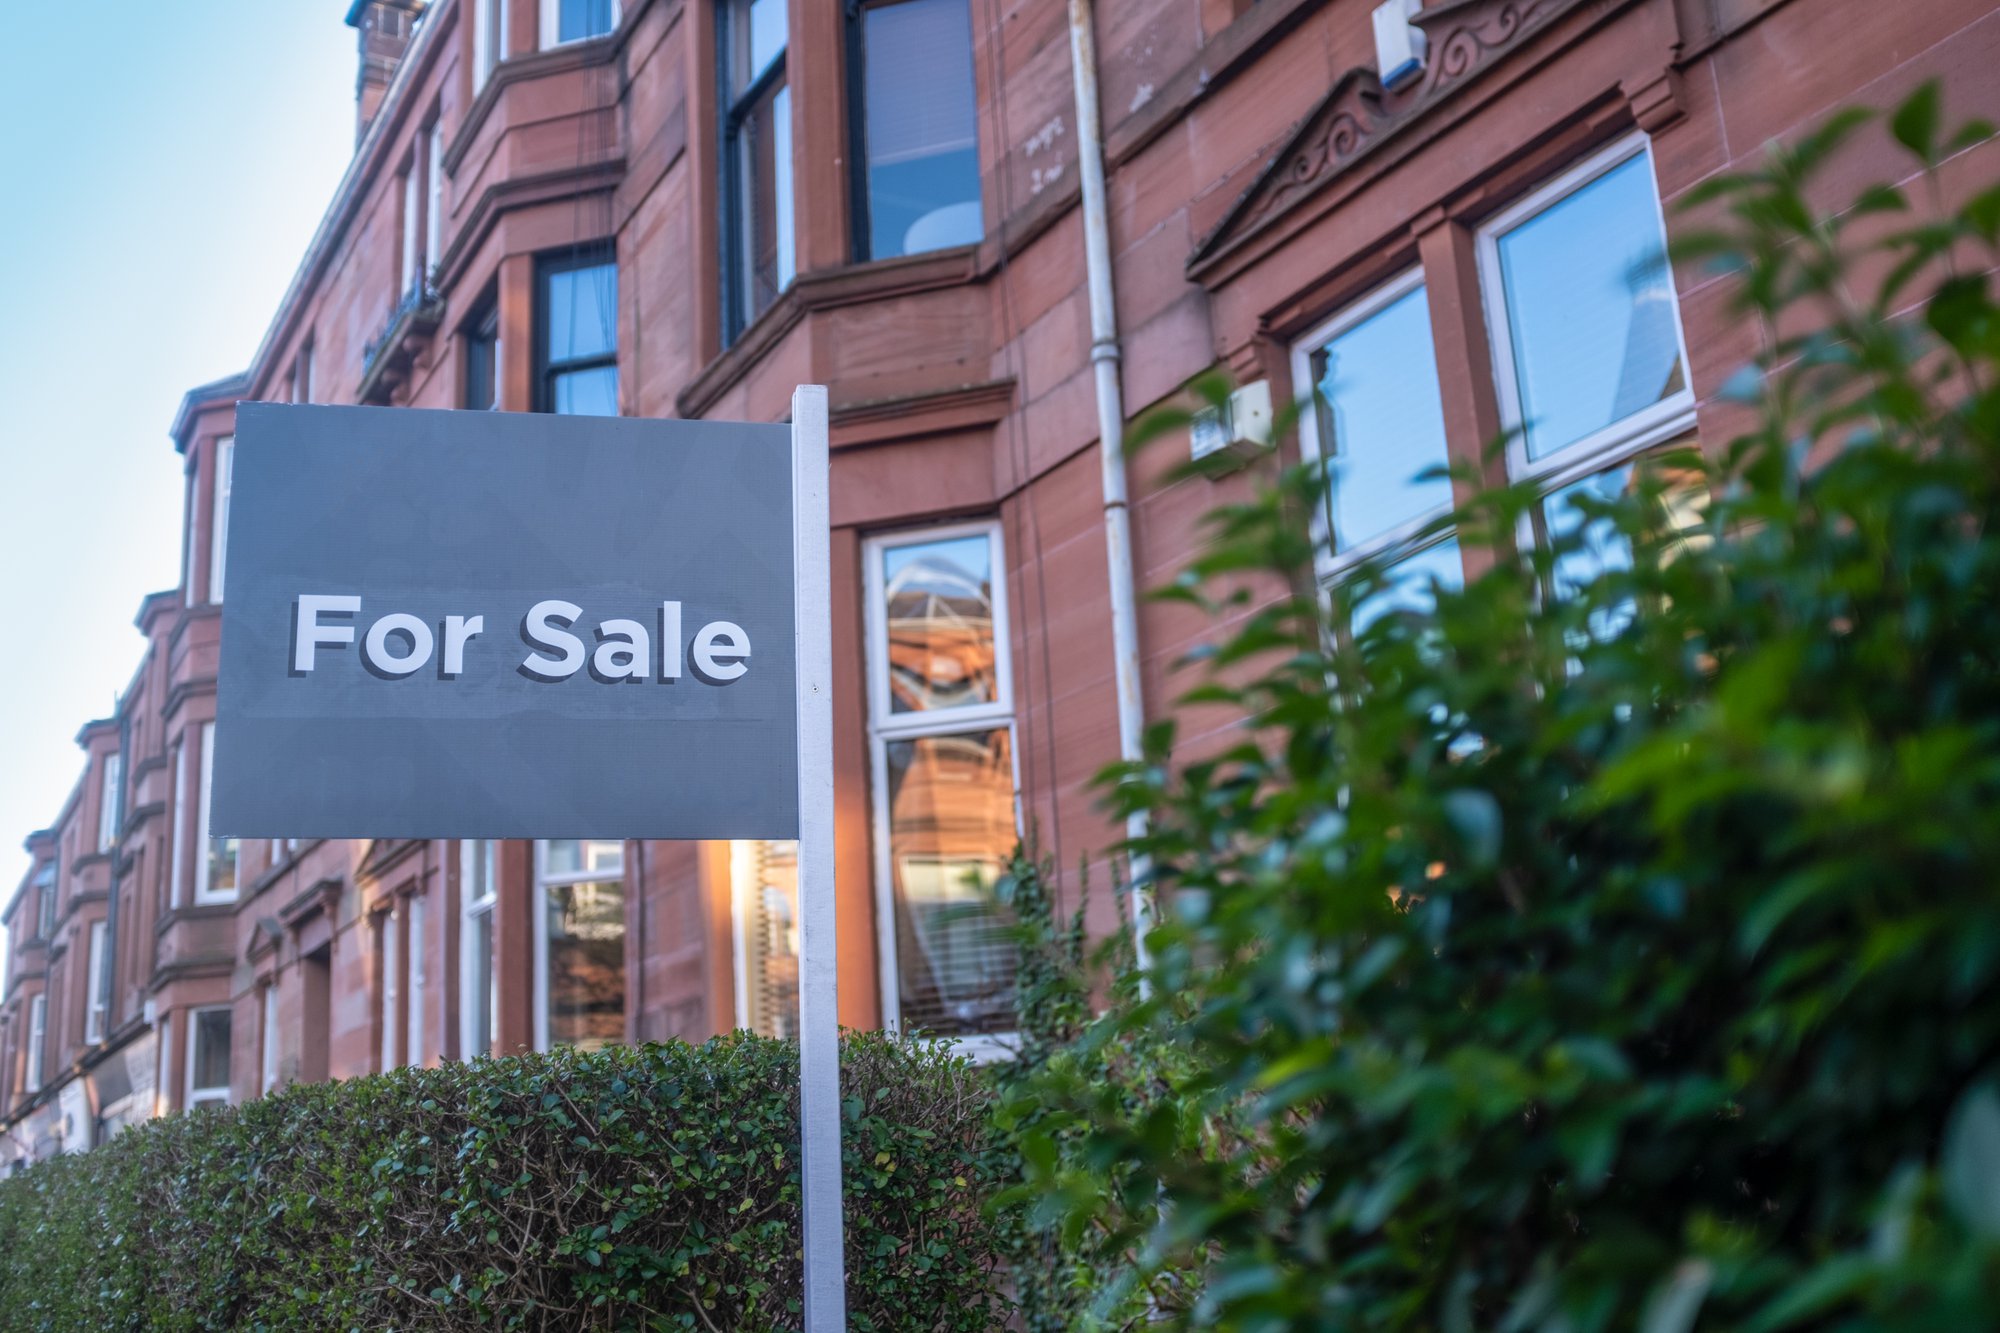 Why are UK Landlords Quitting the Private Rented Sector?